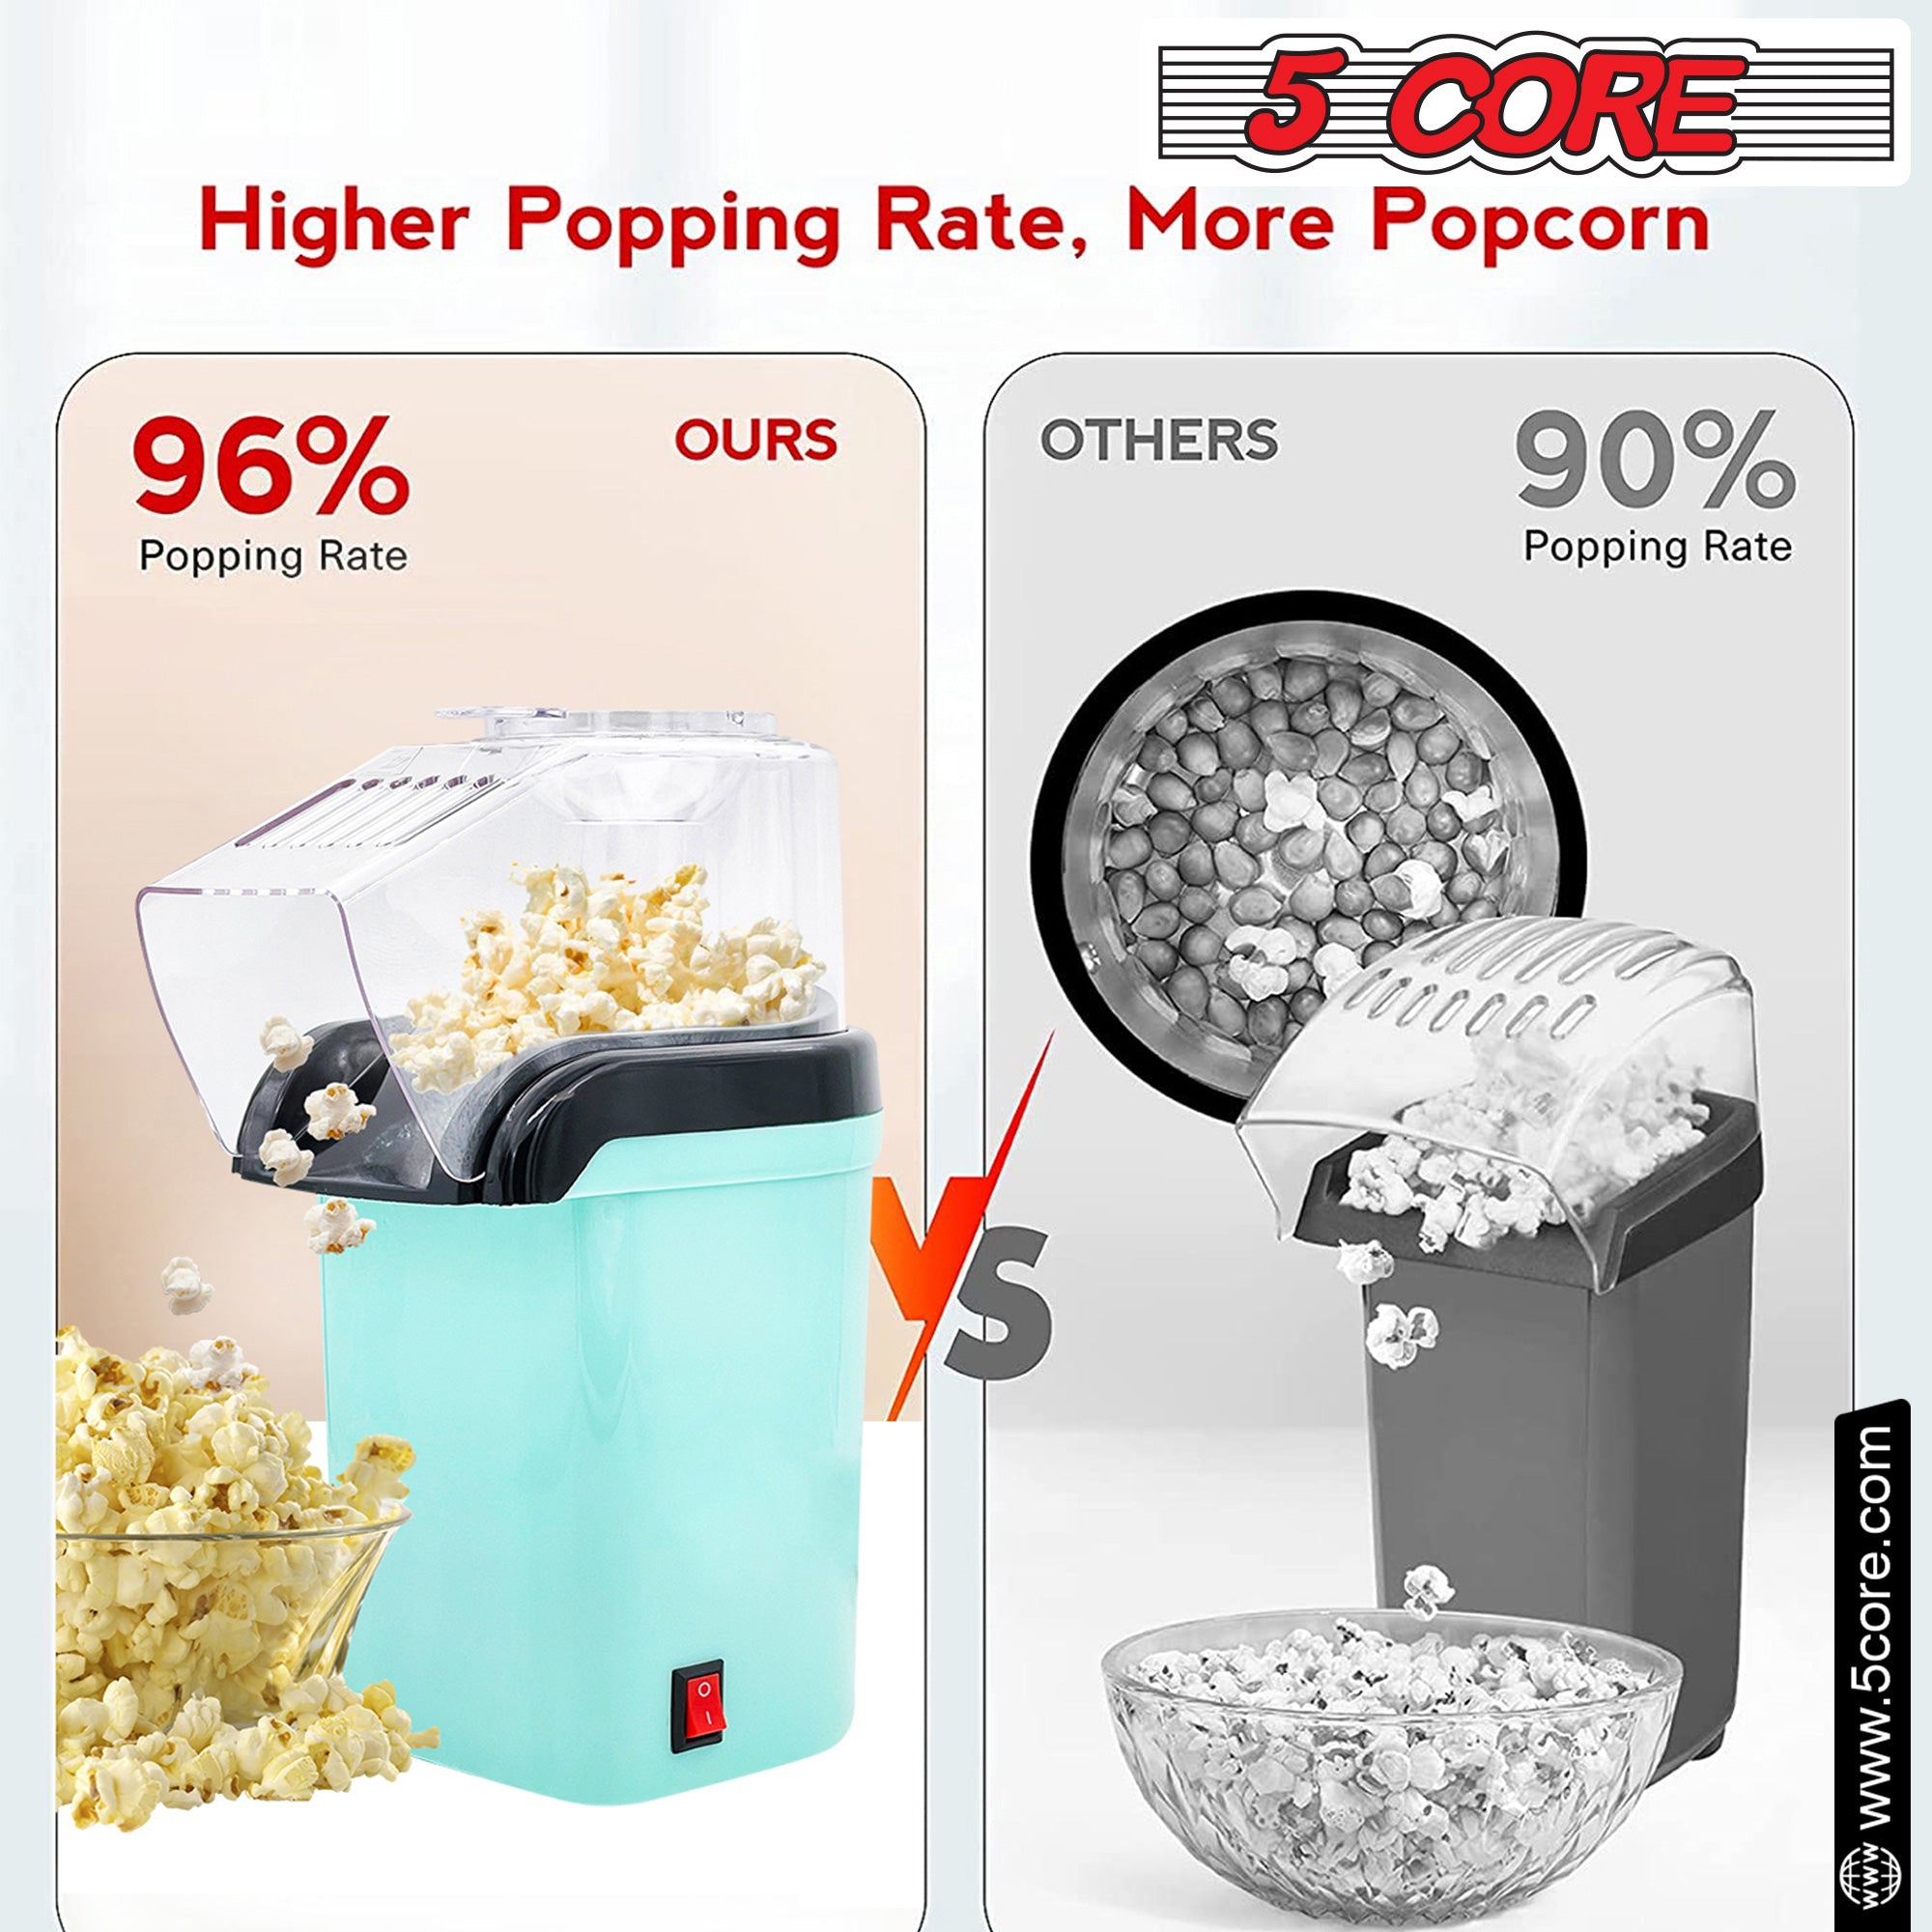 higher popping rate, more popcorn